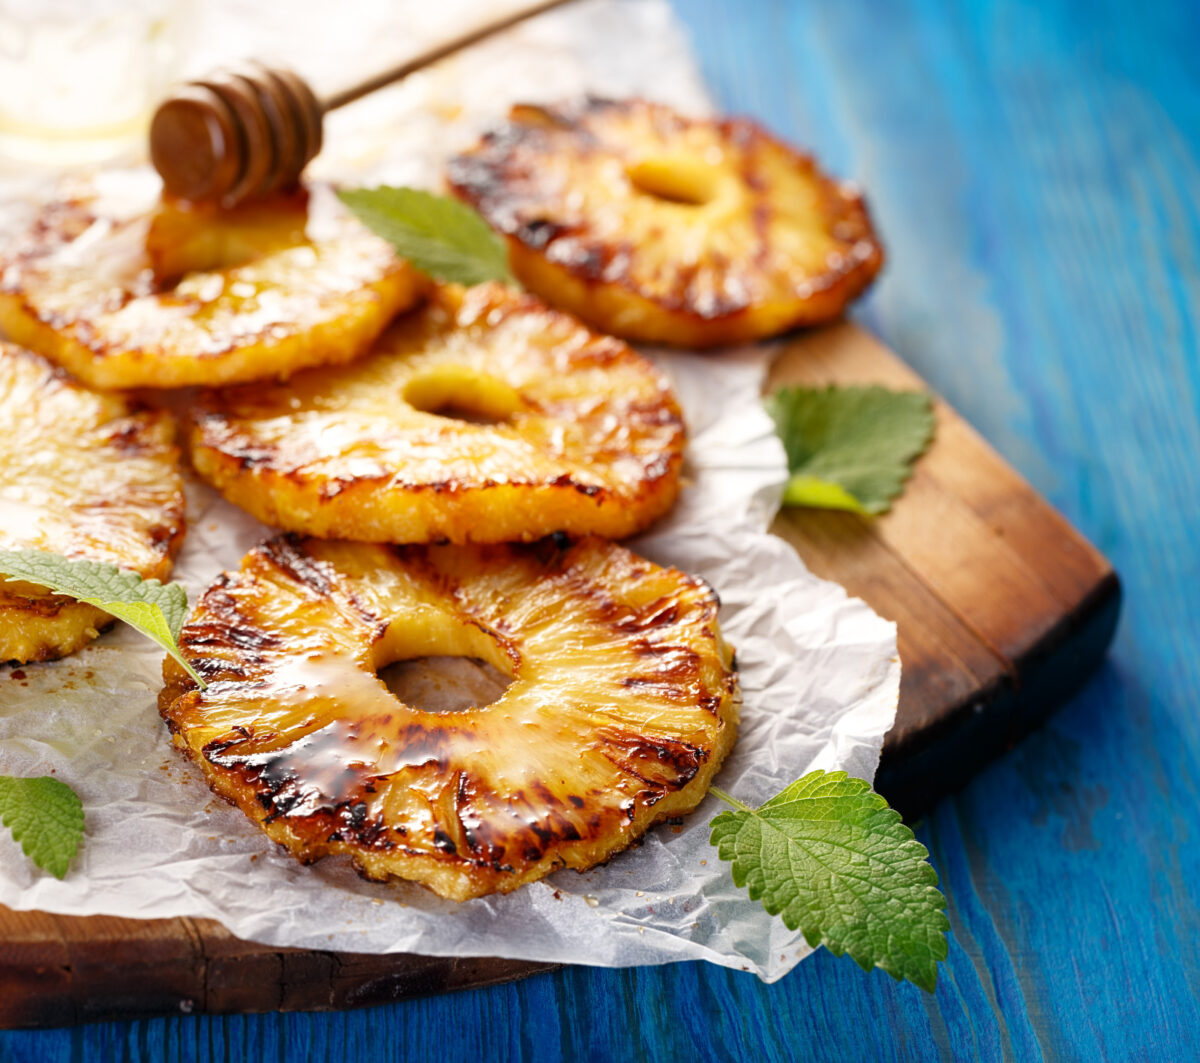 Grilled pineapple slices on a cutting board garnished with mint and drizzled honey.